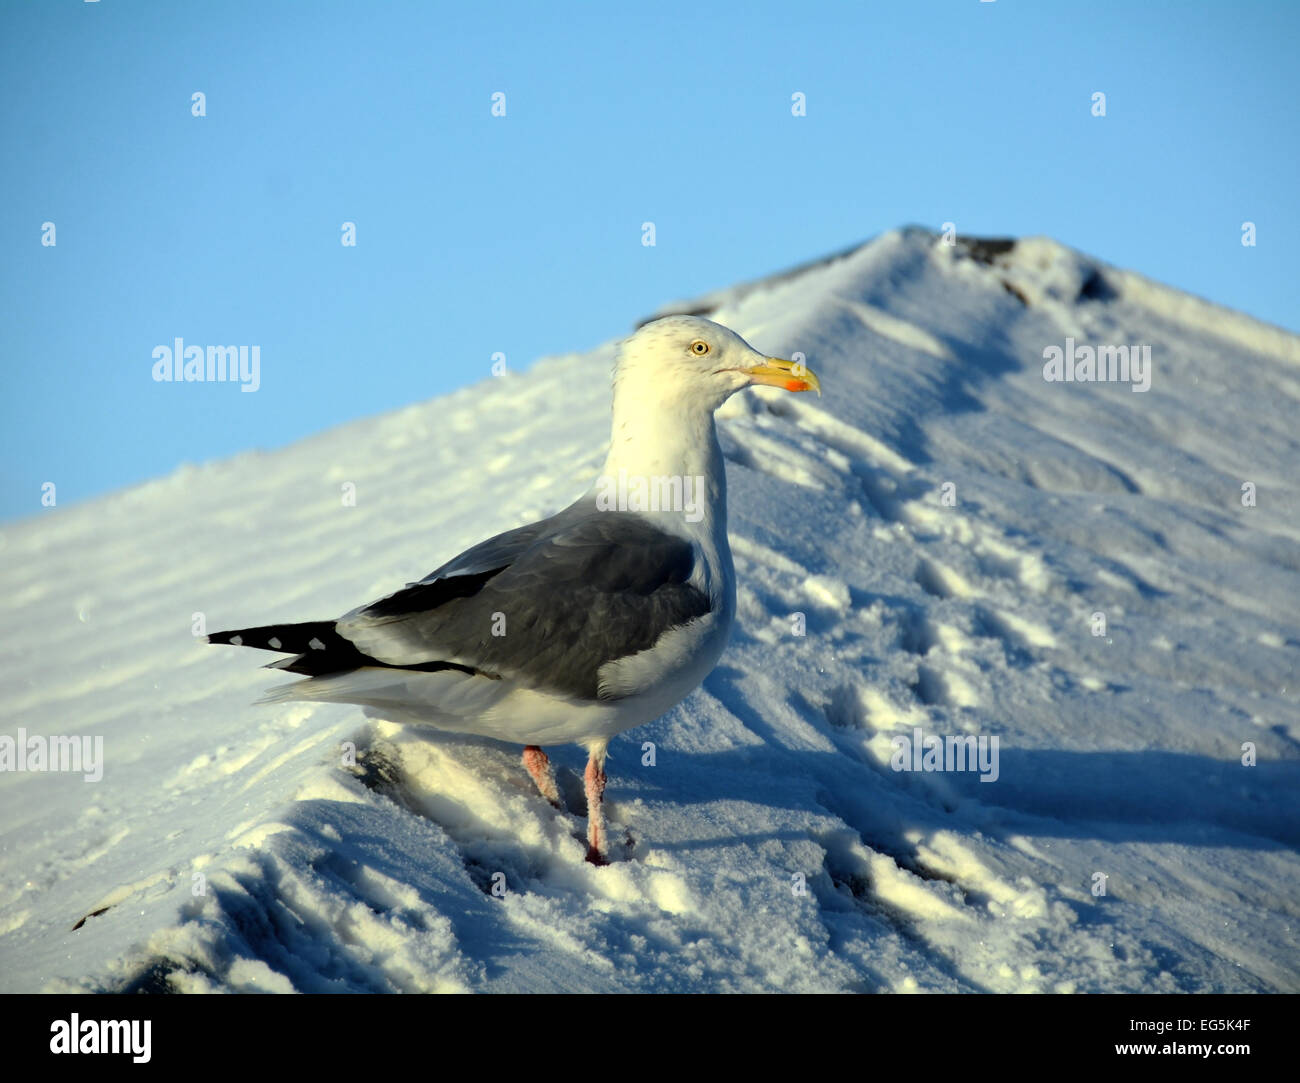 A European herring gull standing on a snow covered roof. Stock Photo